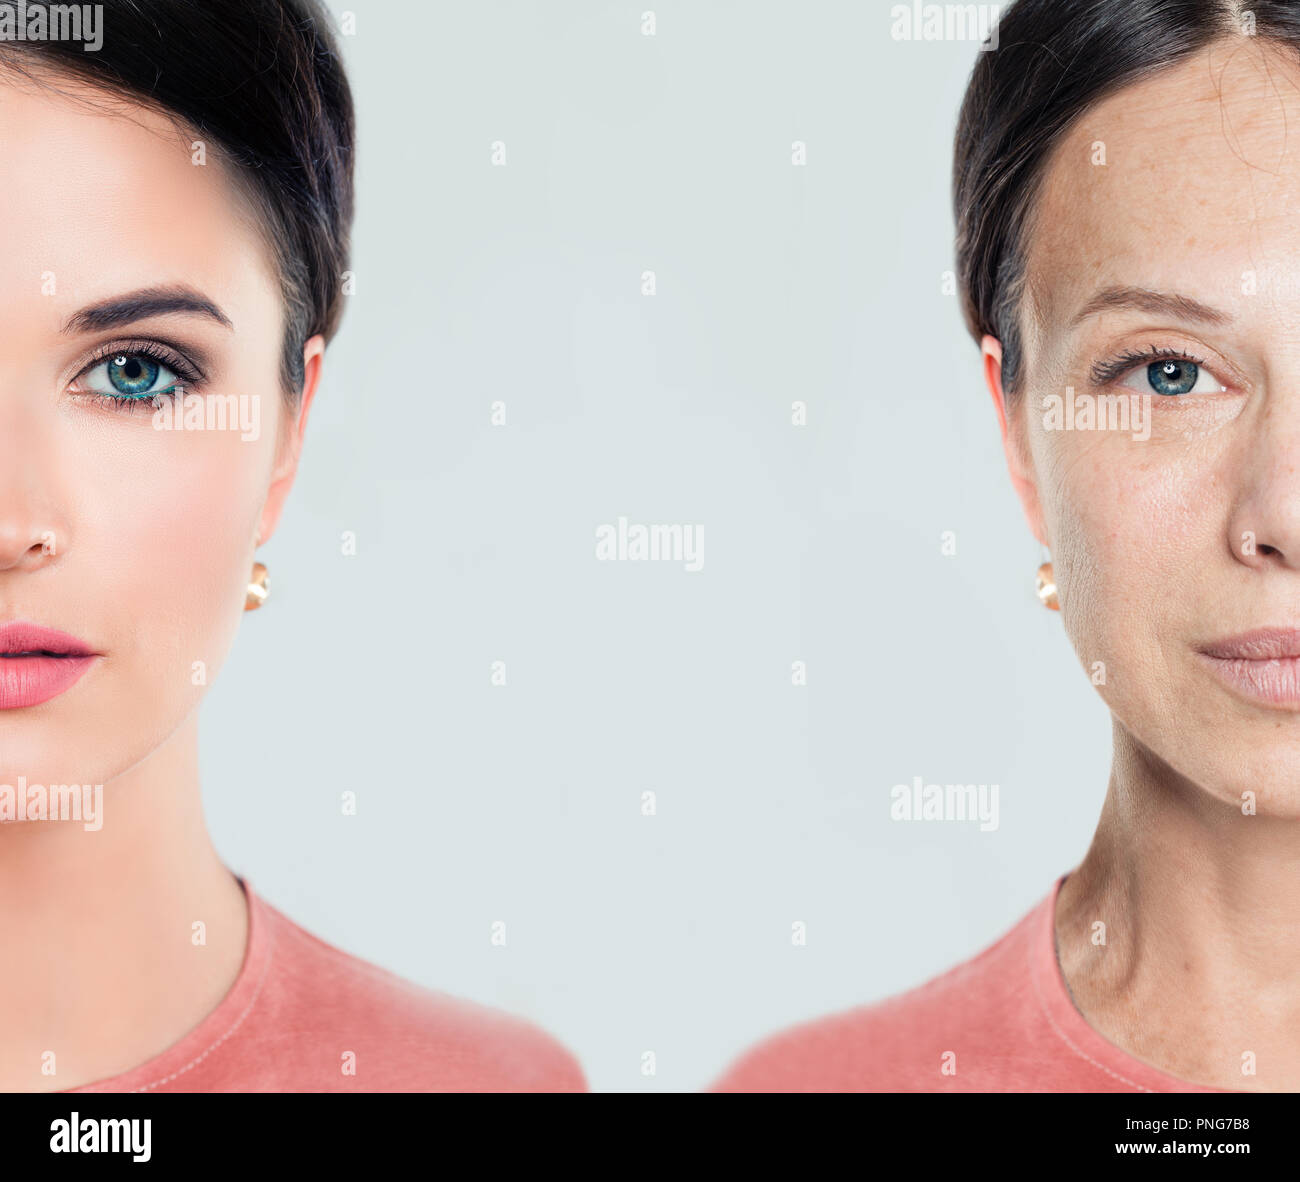 Aging and youth female face. Woman, beauty treatment and lifting. Before and after, youth and old age. Process of aging and rejuvenation Stock Photo